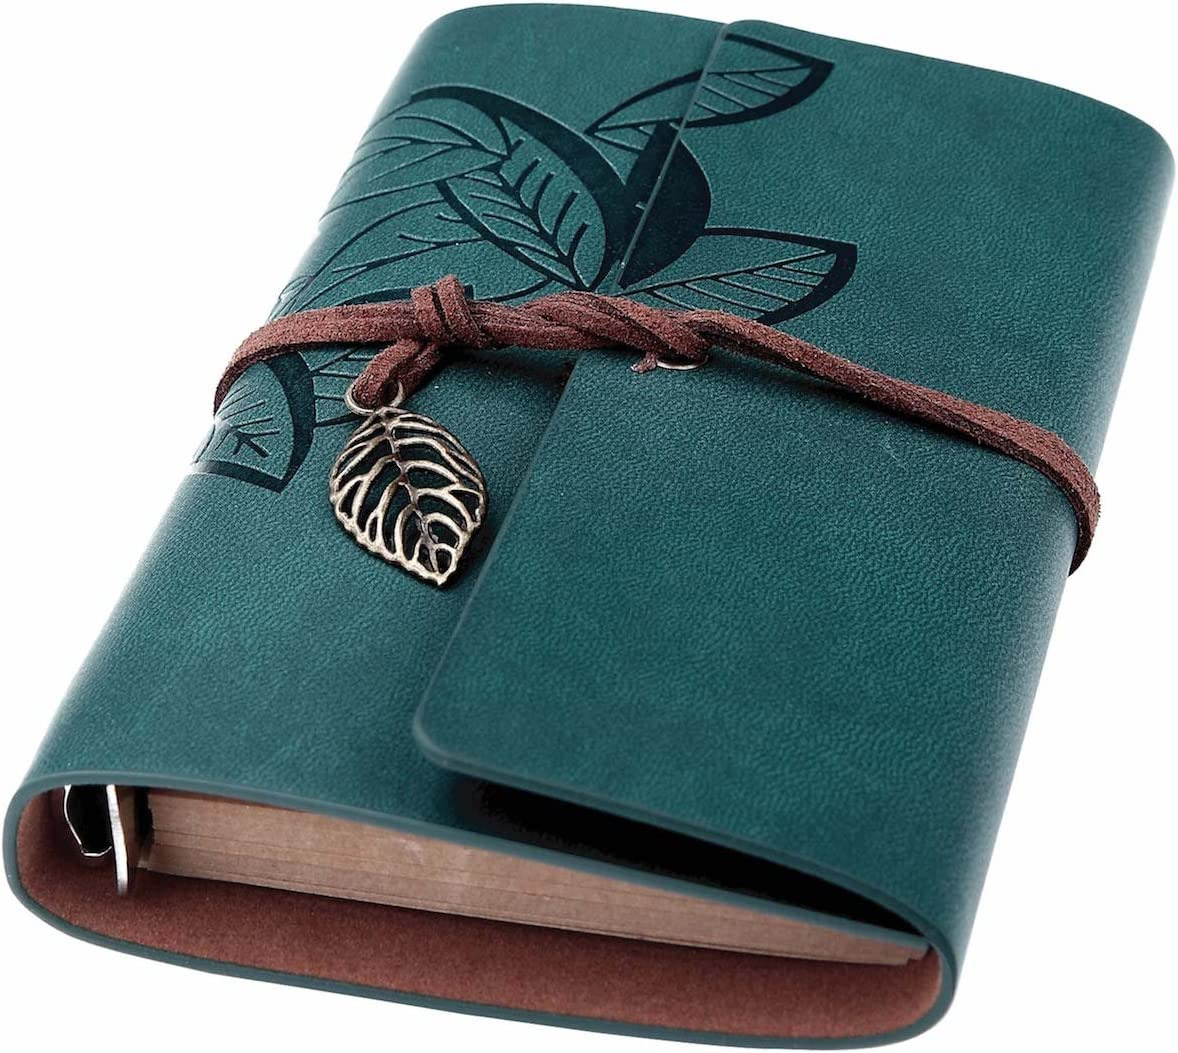 Travel Journal Notebook, Refillable Leather Journal Diary for Men Women NEW